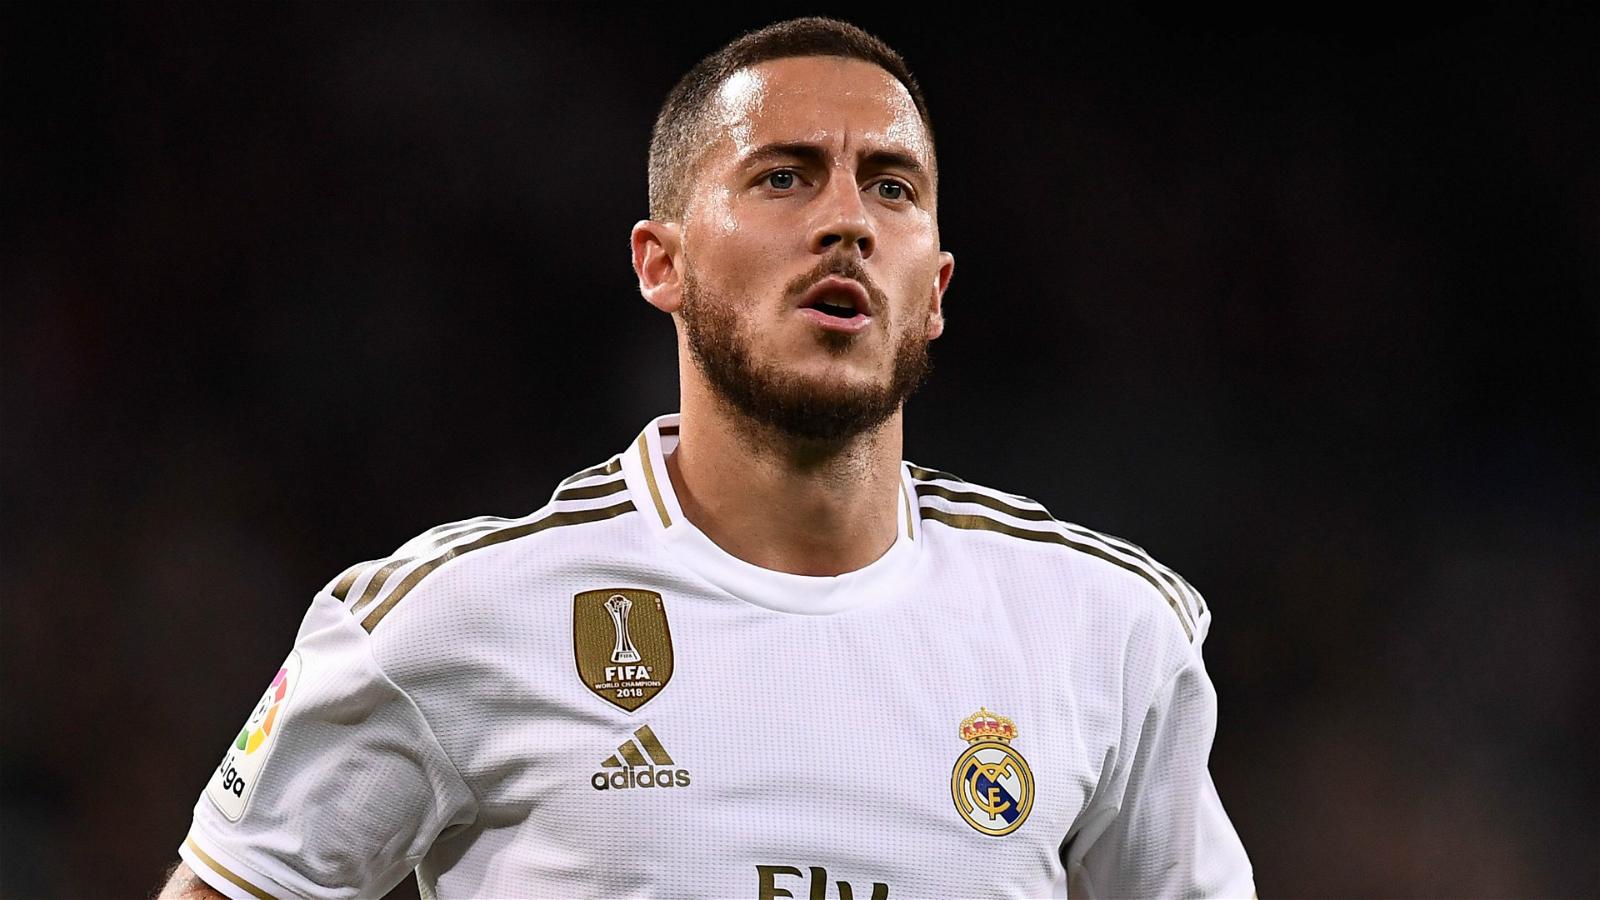 Eden Hazard to leave Real Madrid after contract termination